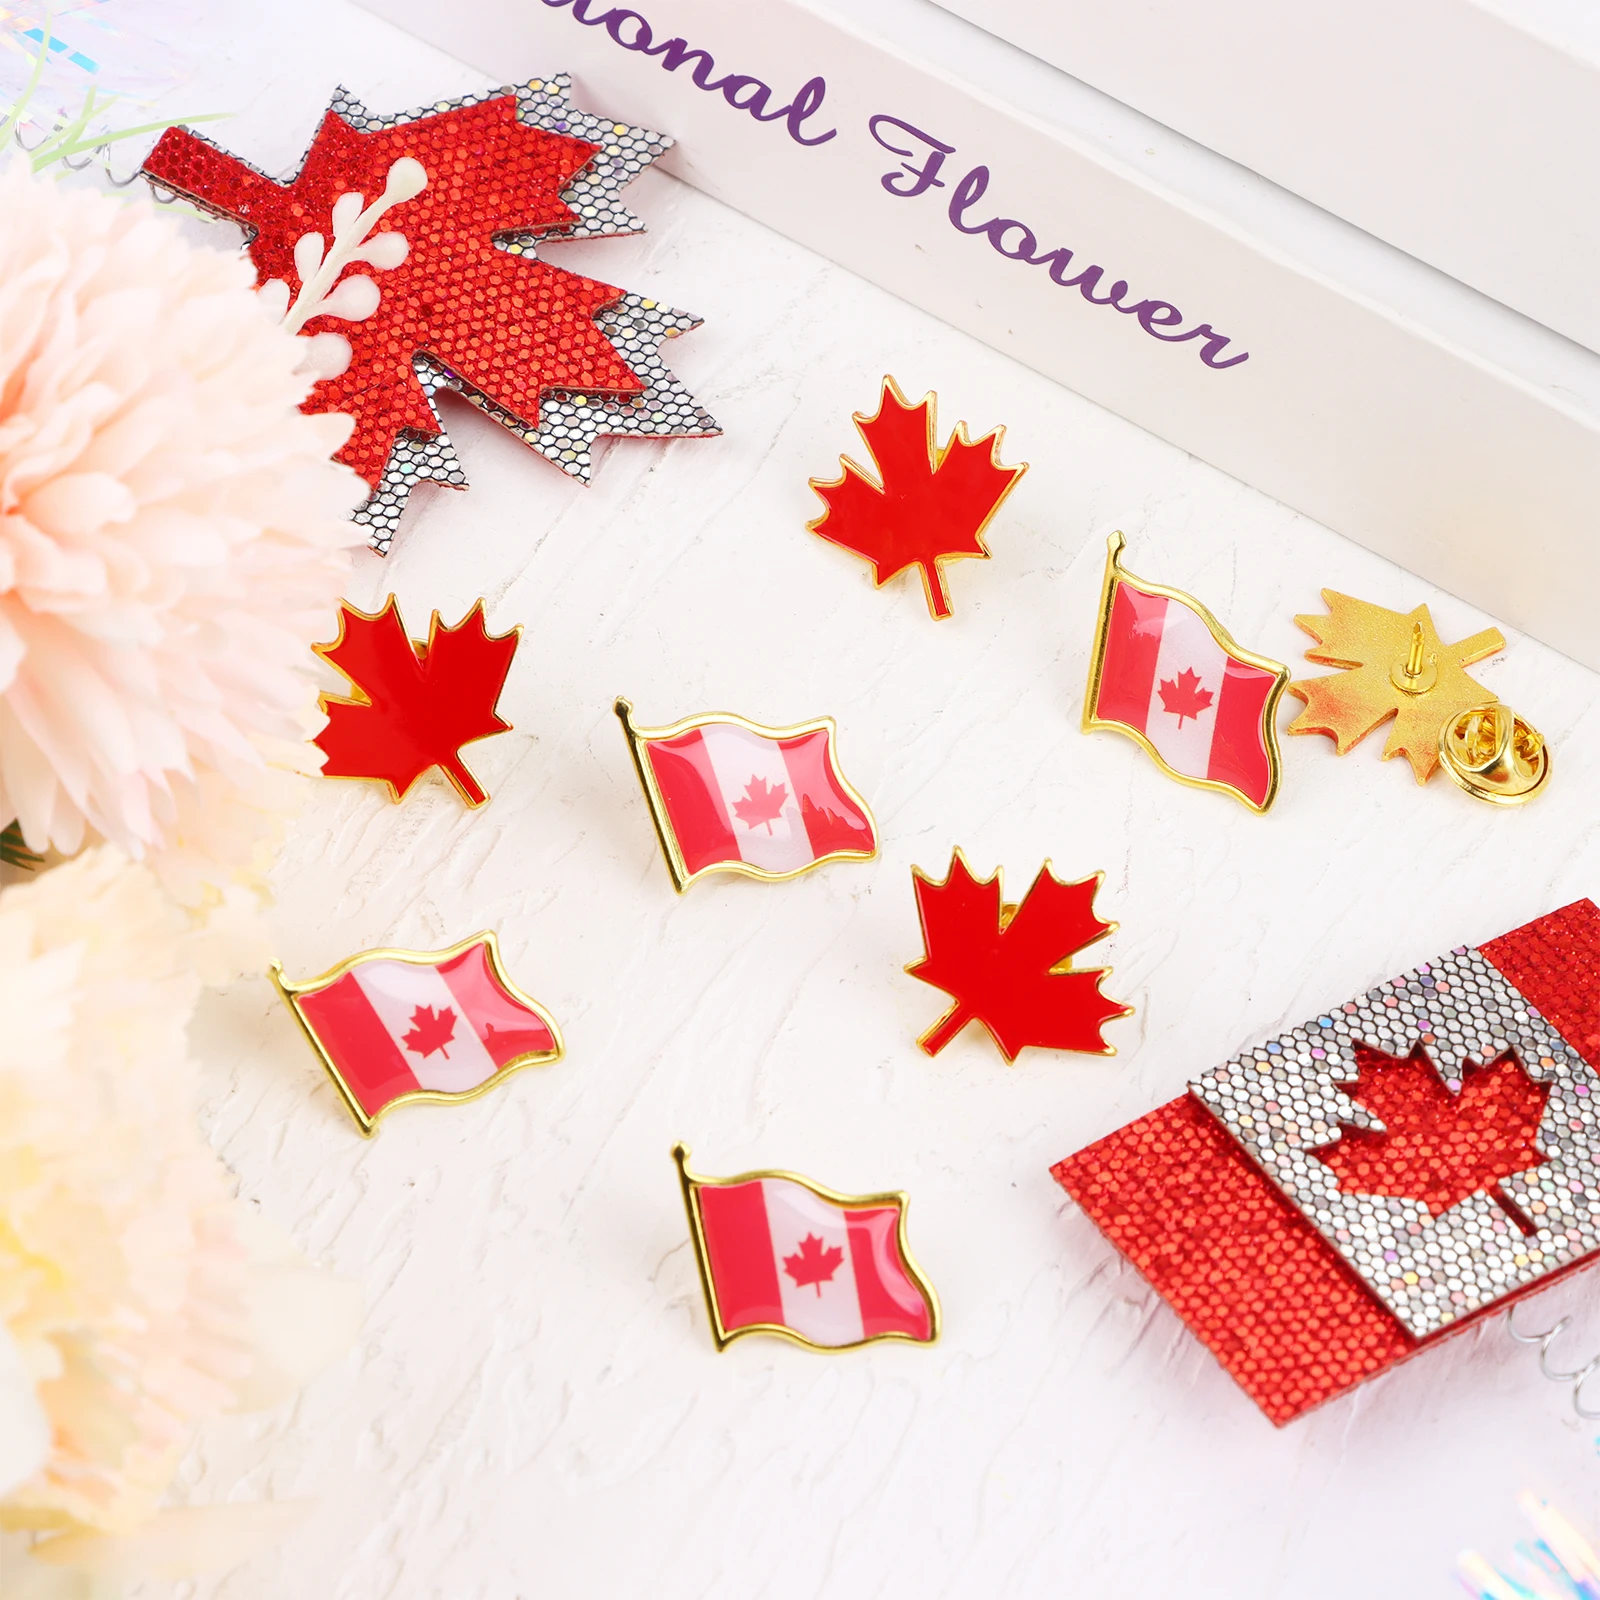 

30 Pcs Waving Canada Flag Lapel Pin Red Maple Leaf Brooch Canada Day Decorations Patriotic Canadian Souvenirs Small Pins Jewelry